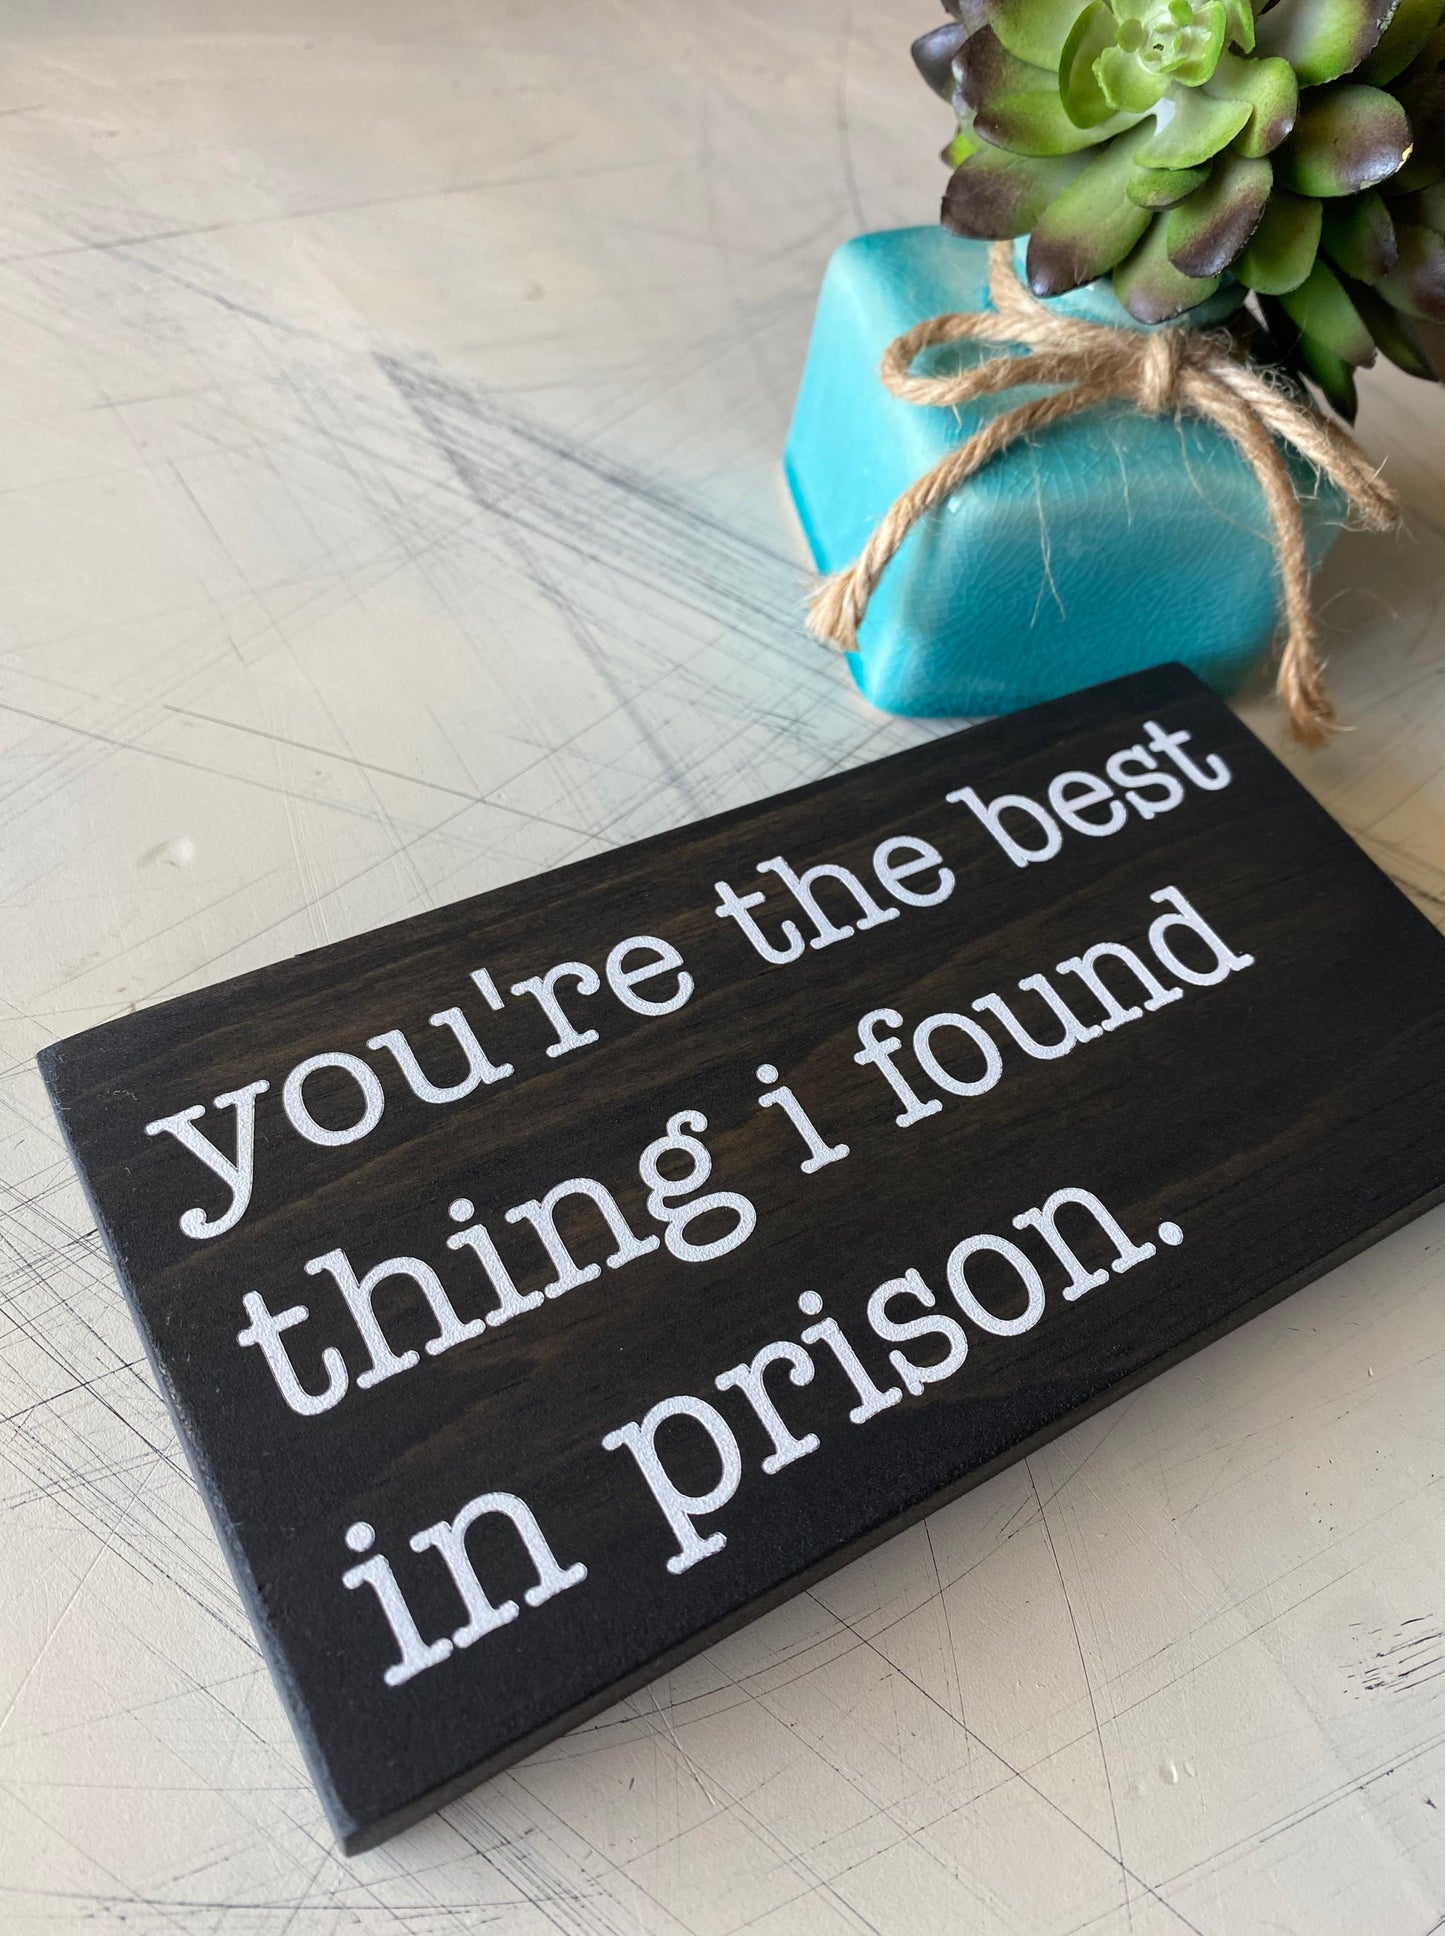 you're the best thing i found in prison. - Novotny Designs - mini wood sign - funny corrections gift